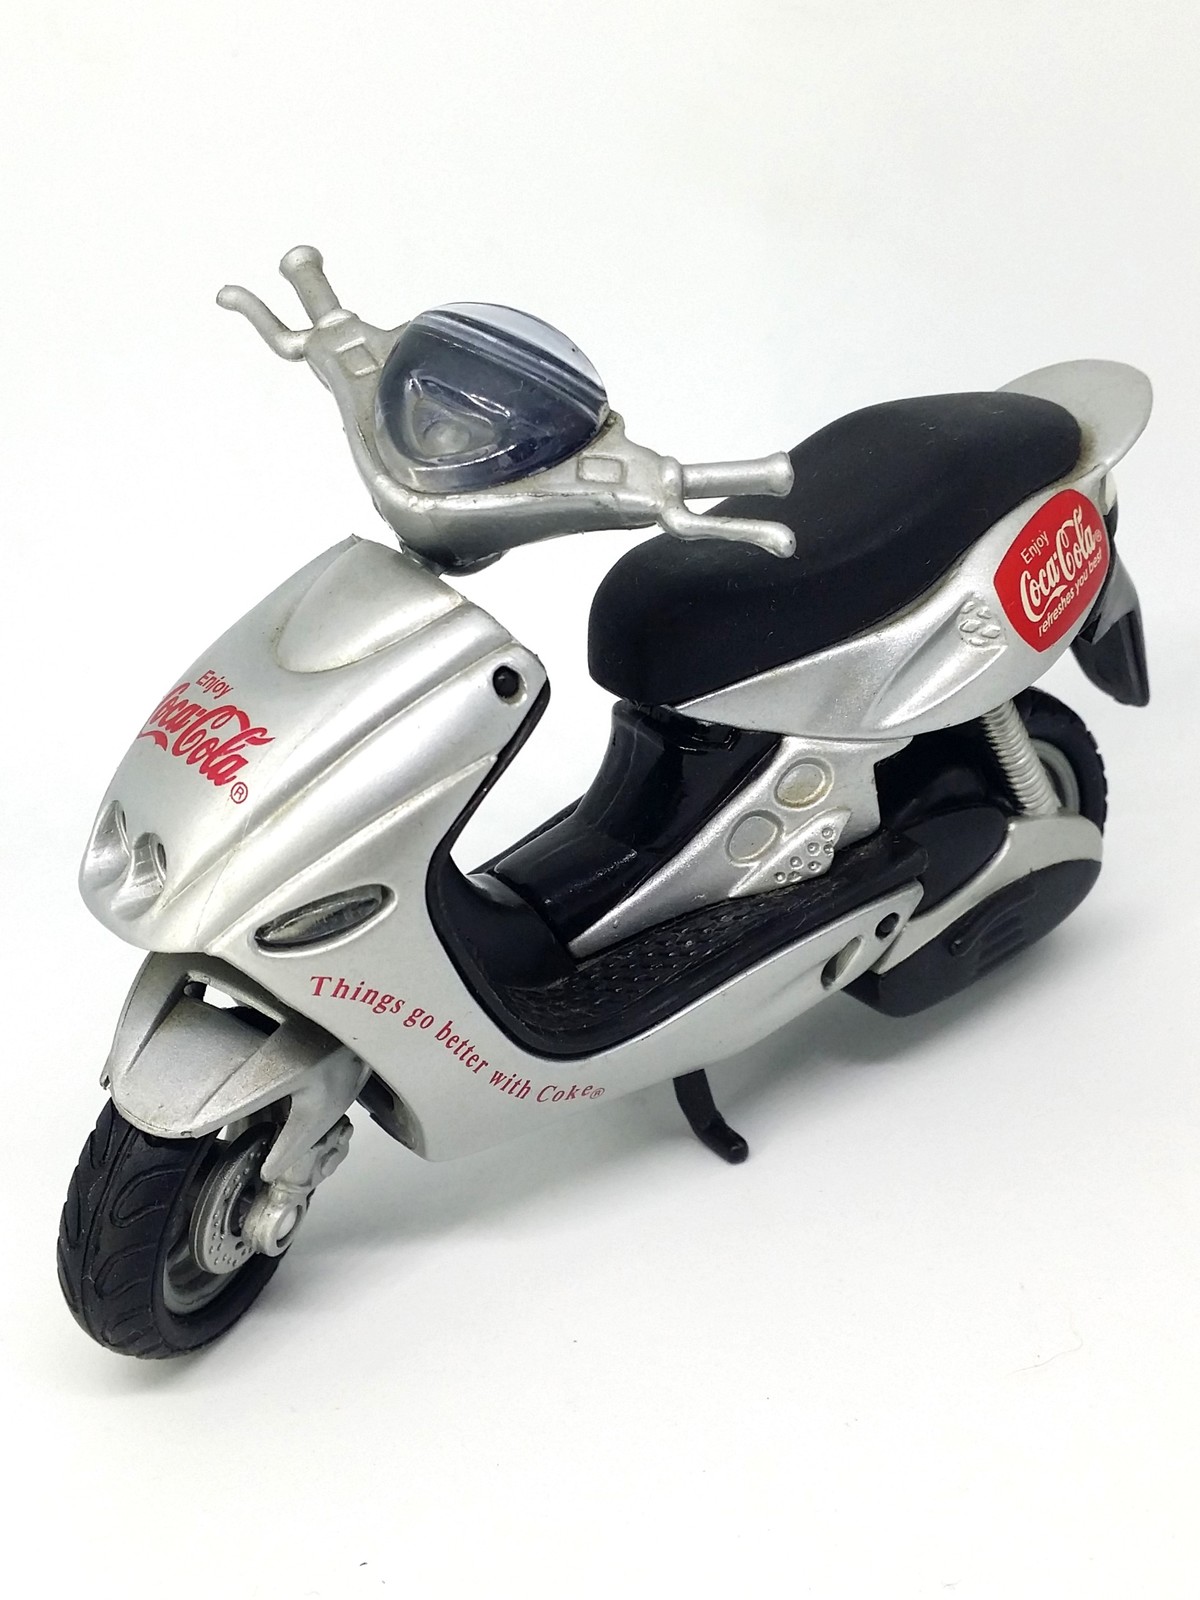 Coca Cola Motor Scooter Silver Diecast Plastic Motorcycle Toy - Vintage 90s - $17.90